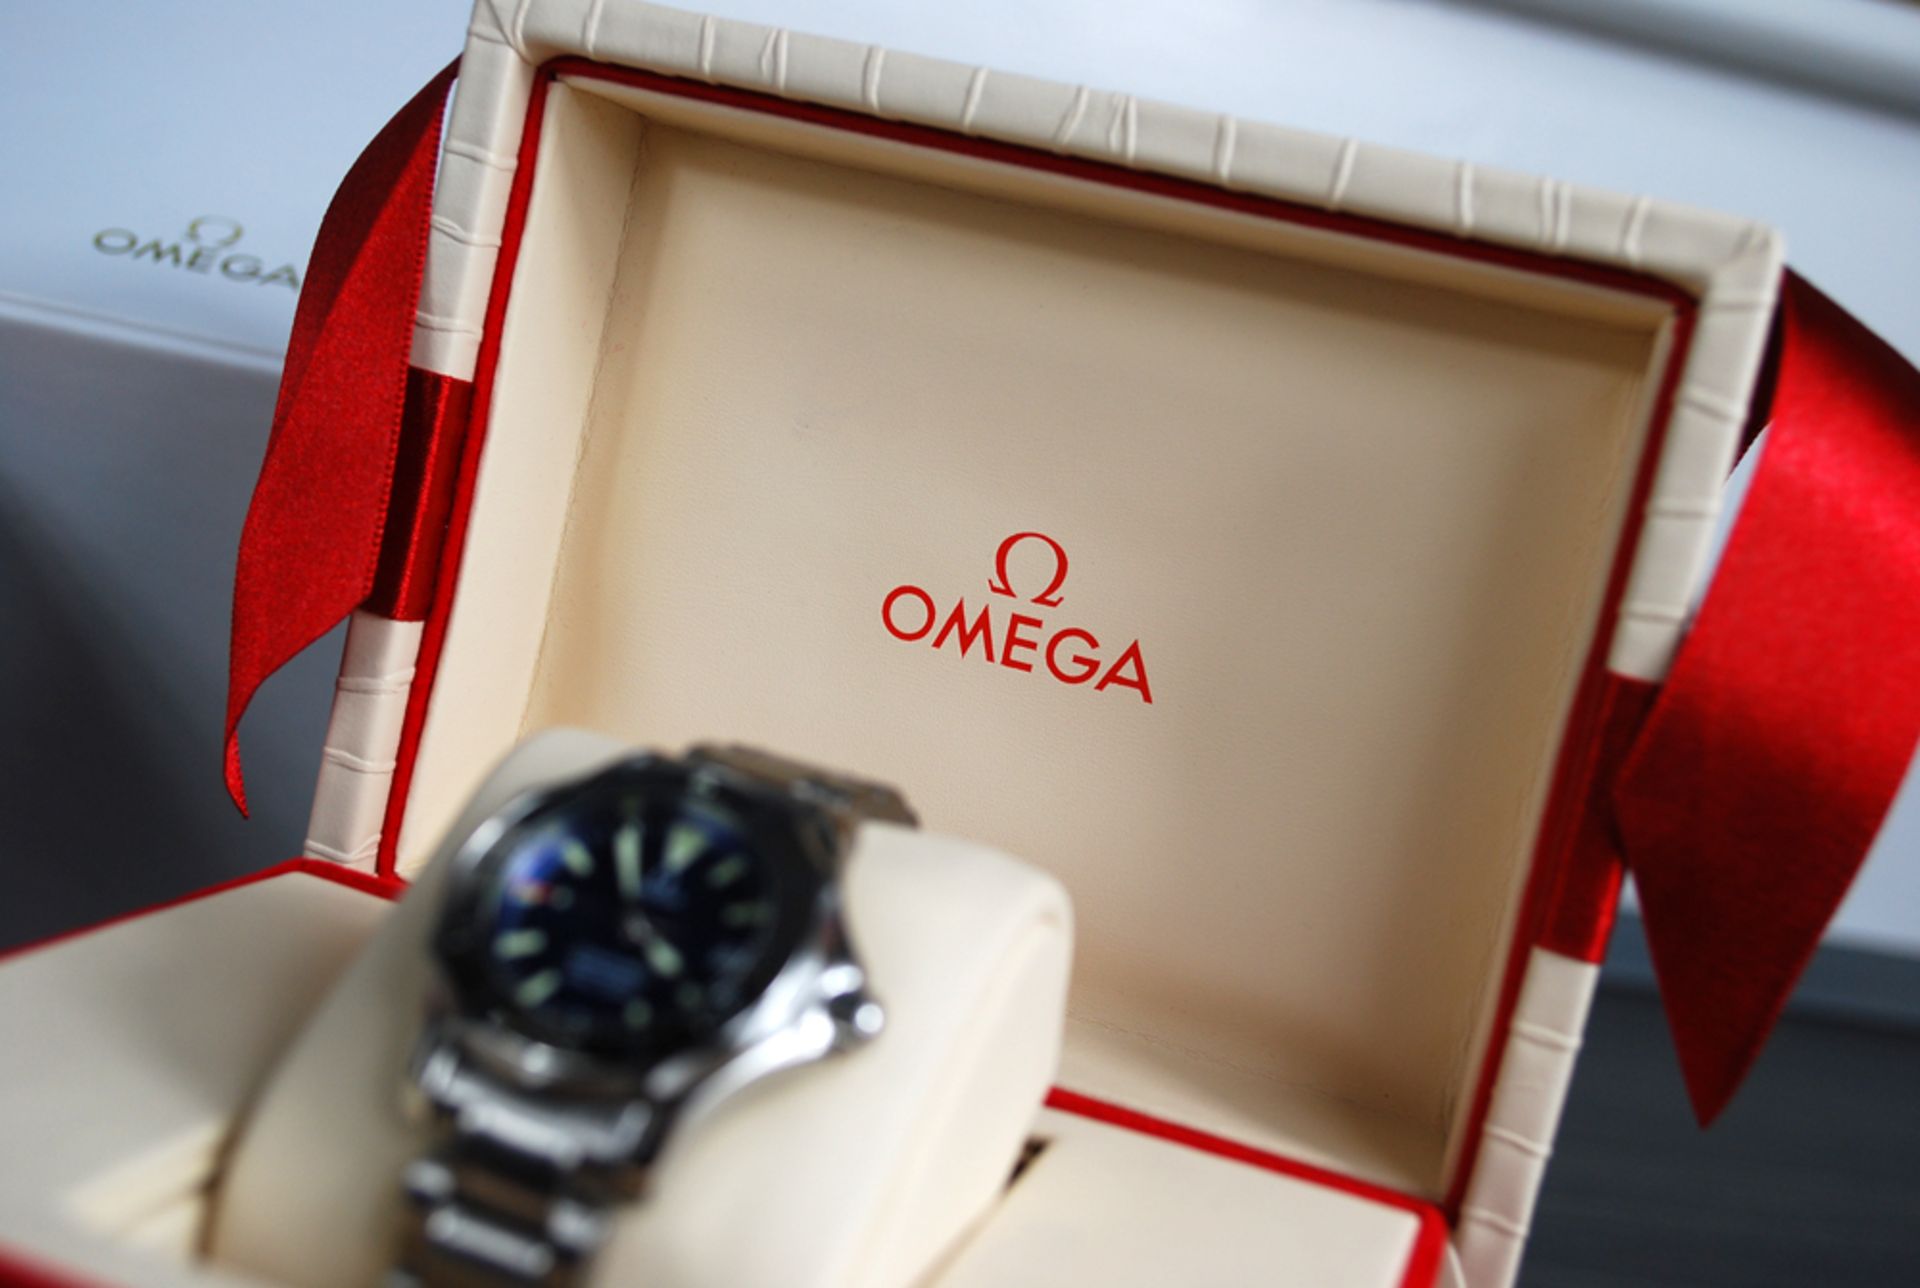 OMEGA SEAMASTER (Ladies) – '2285.80.00' Stainless Steel   Fantastic Watch - Condition: see imagery - Image 10 of 12